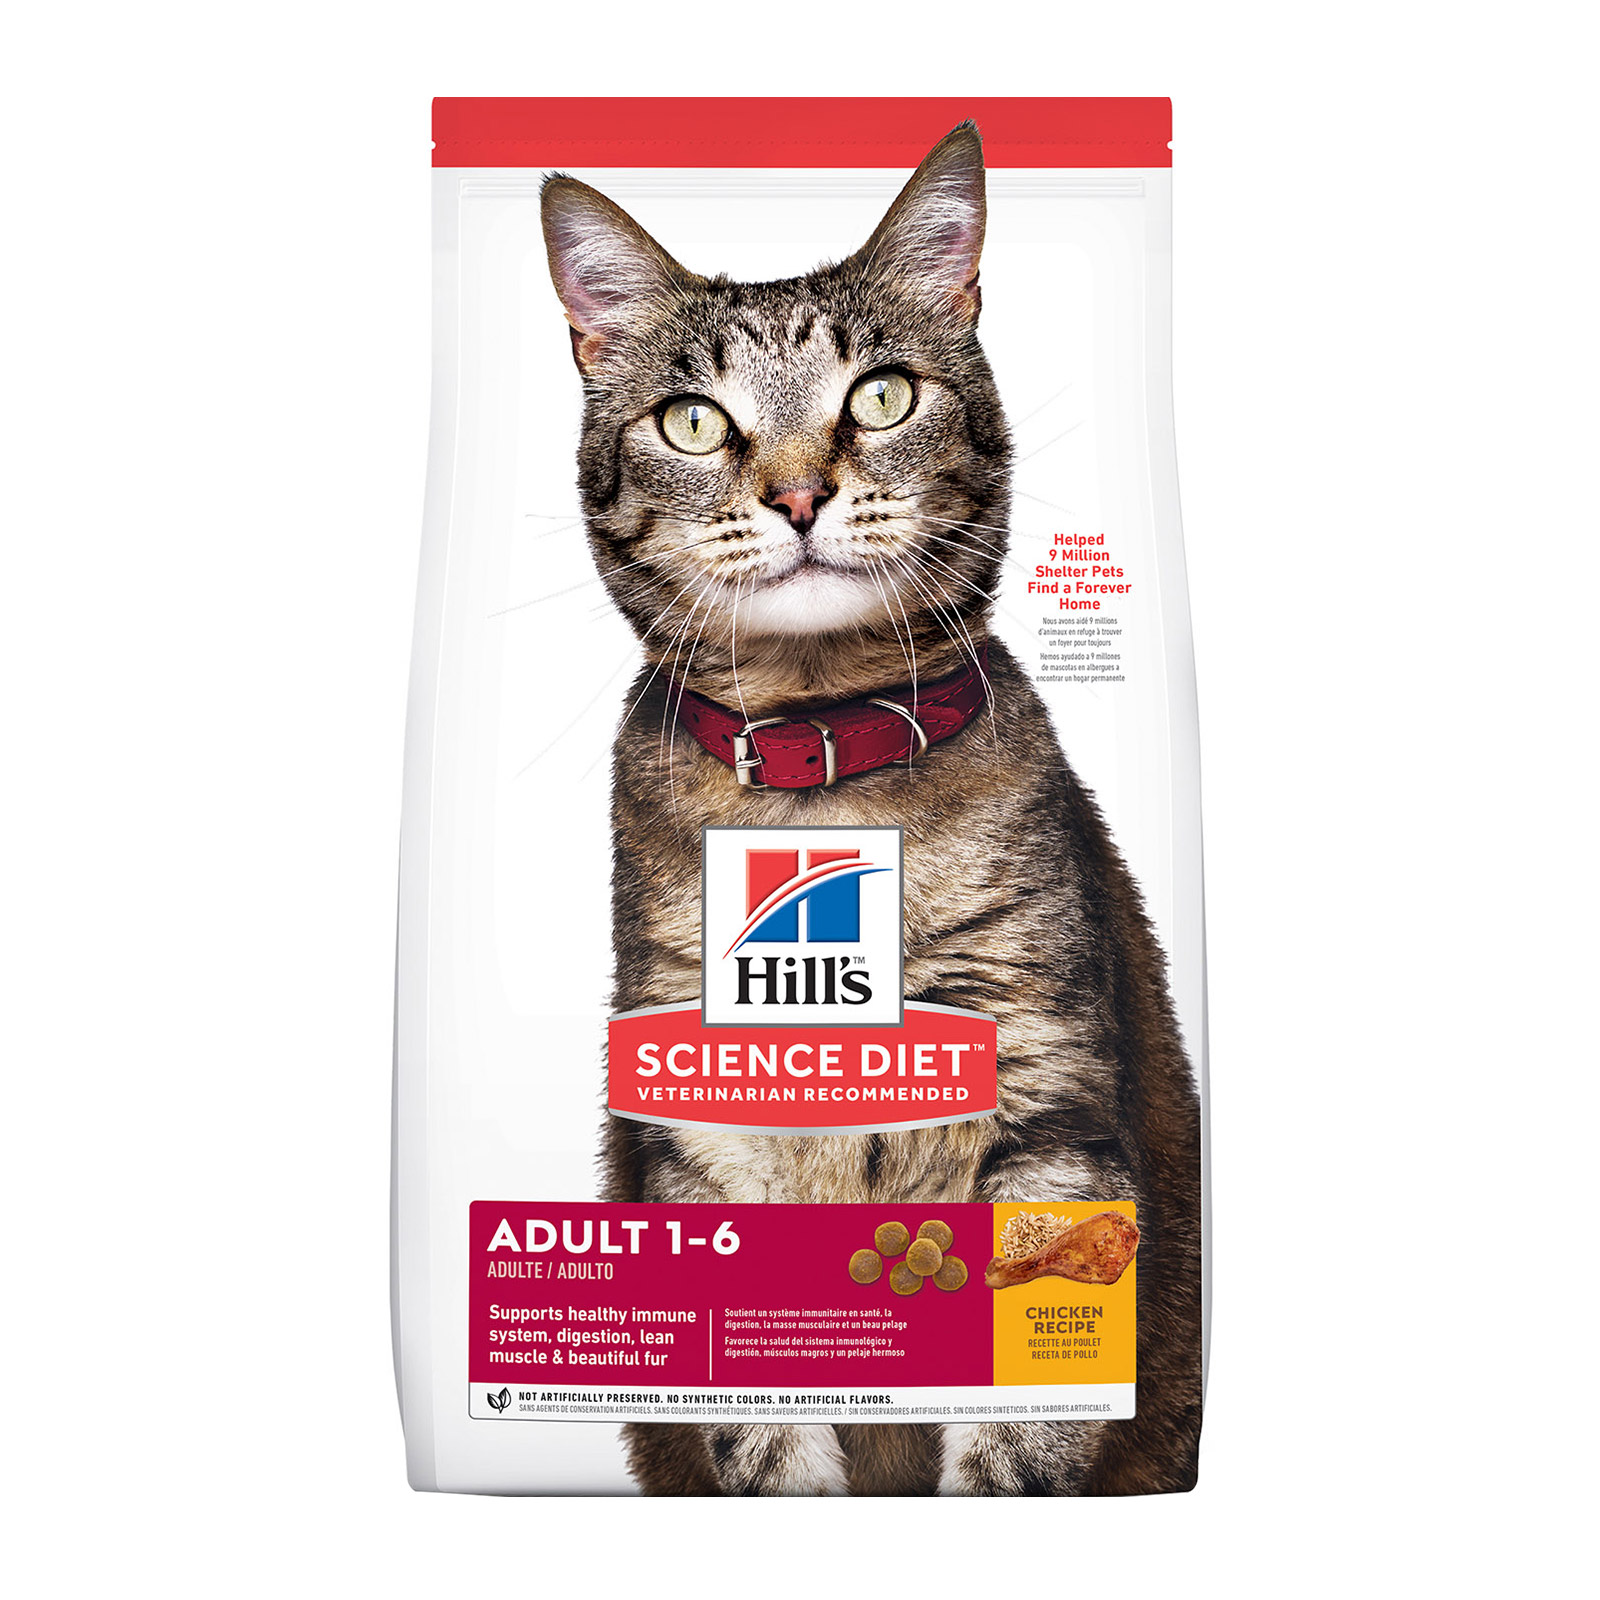 Hill's Science Diet Adult Optimal Care Dry Cat Food